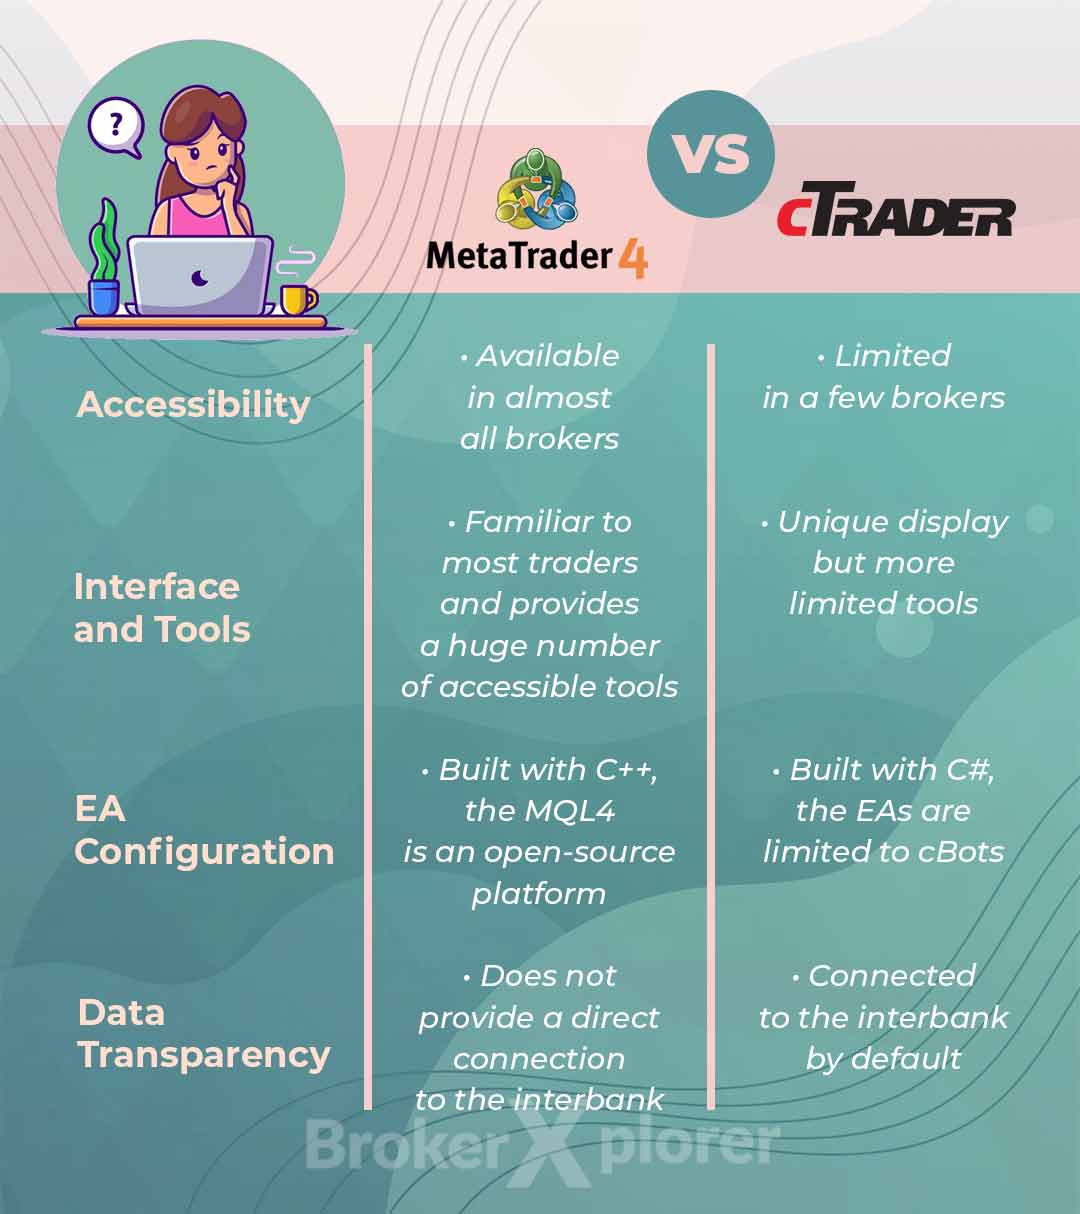 MT4 vs cTrader: Which One is the Best For You?